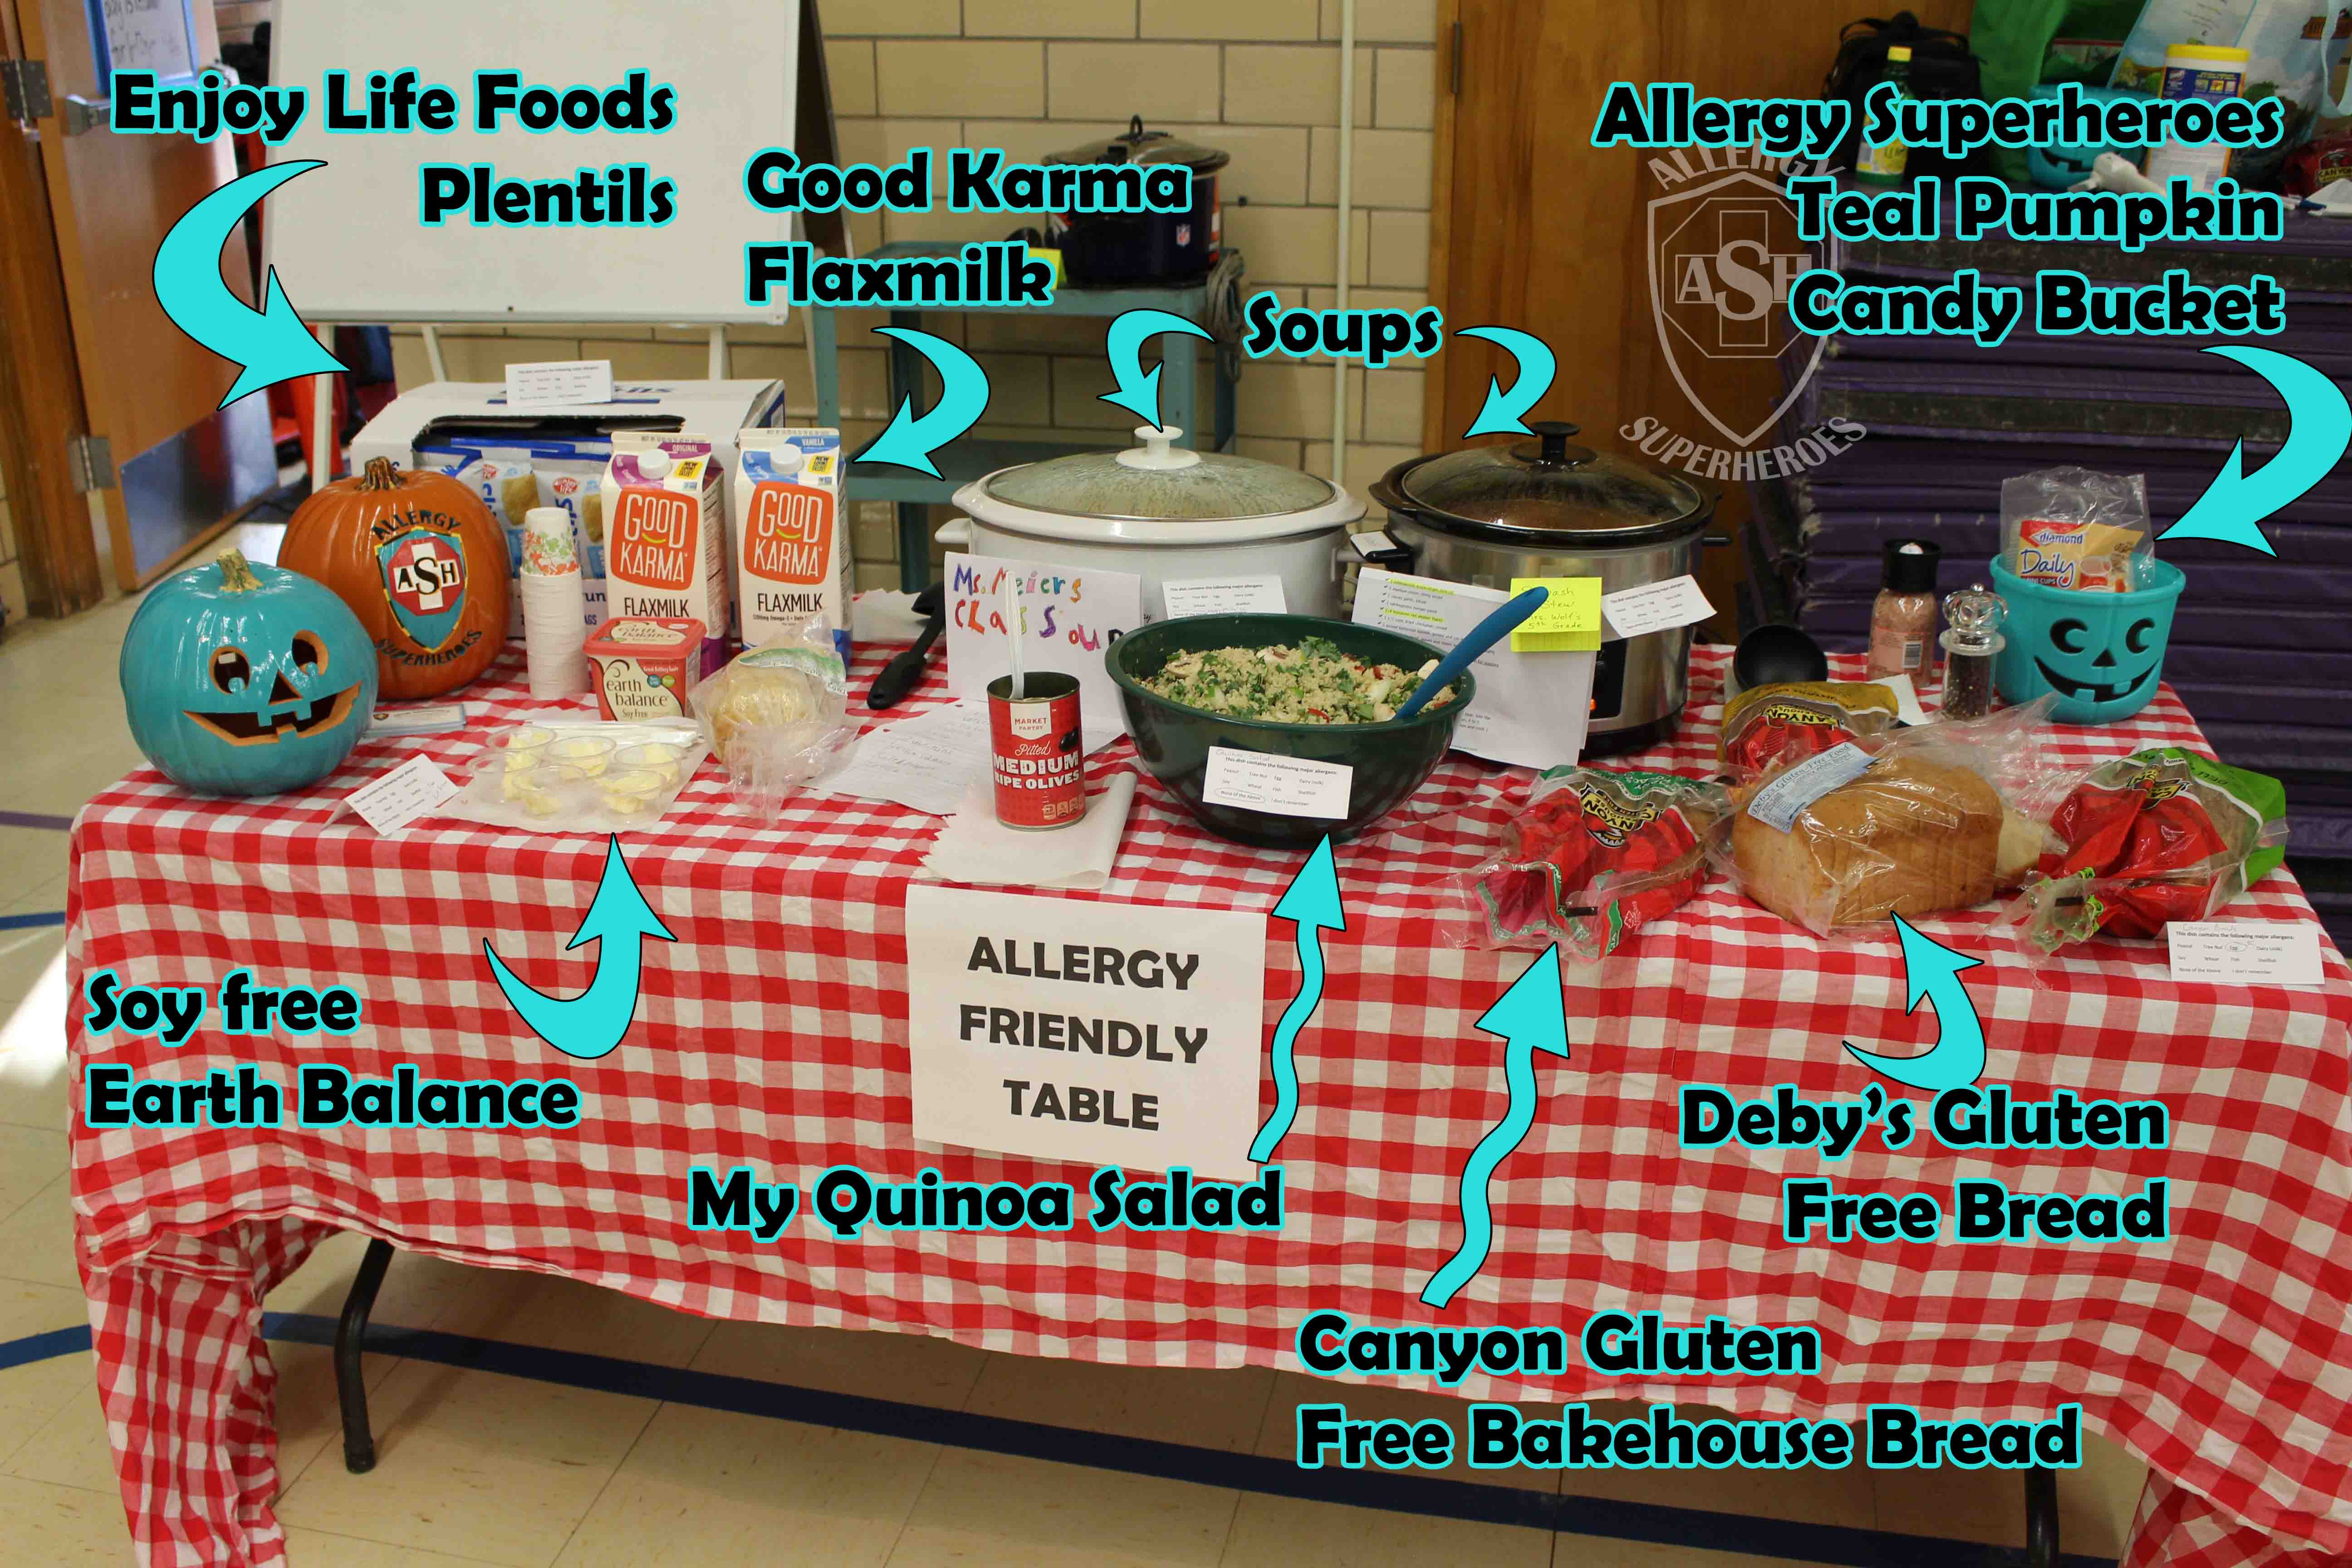 Bringing Allergy Friendliness to a school function! | Allergy Superheroes